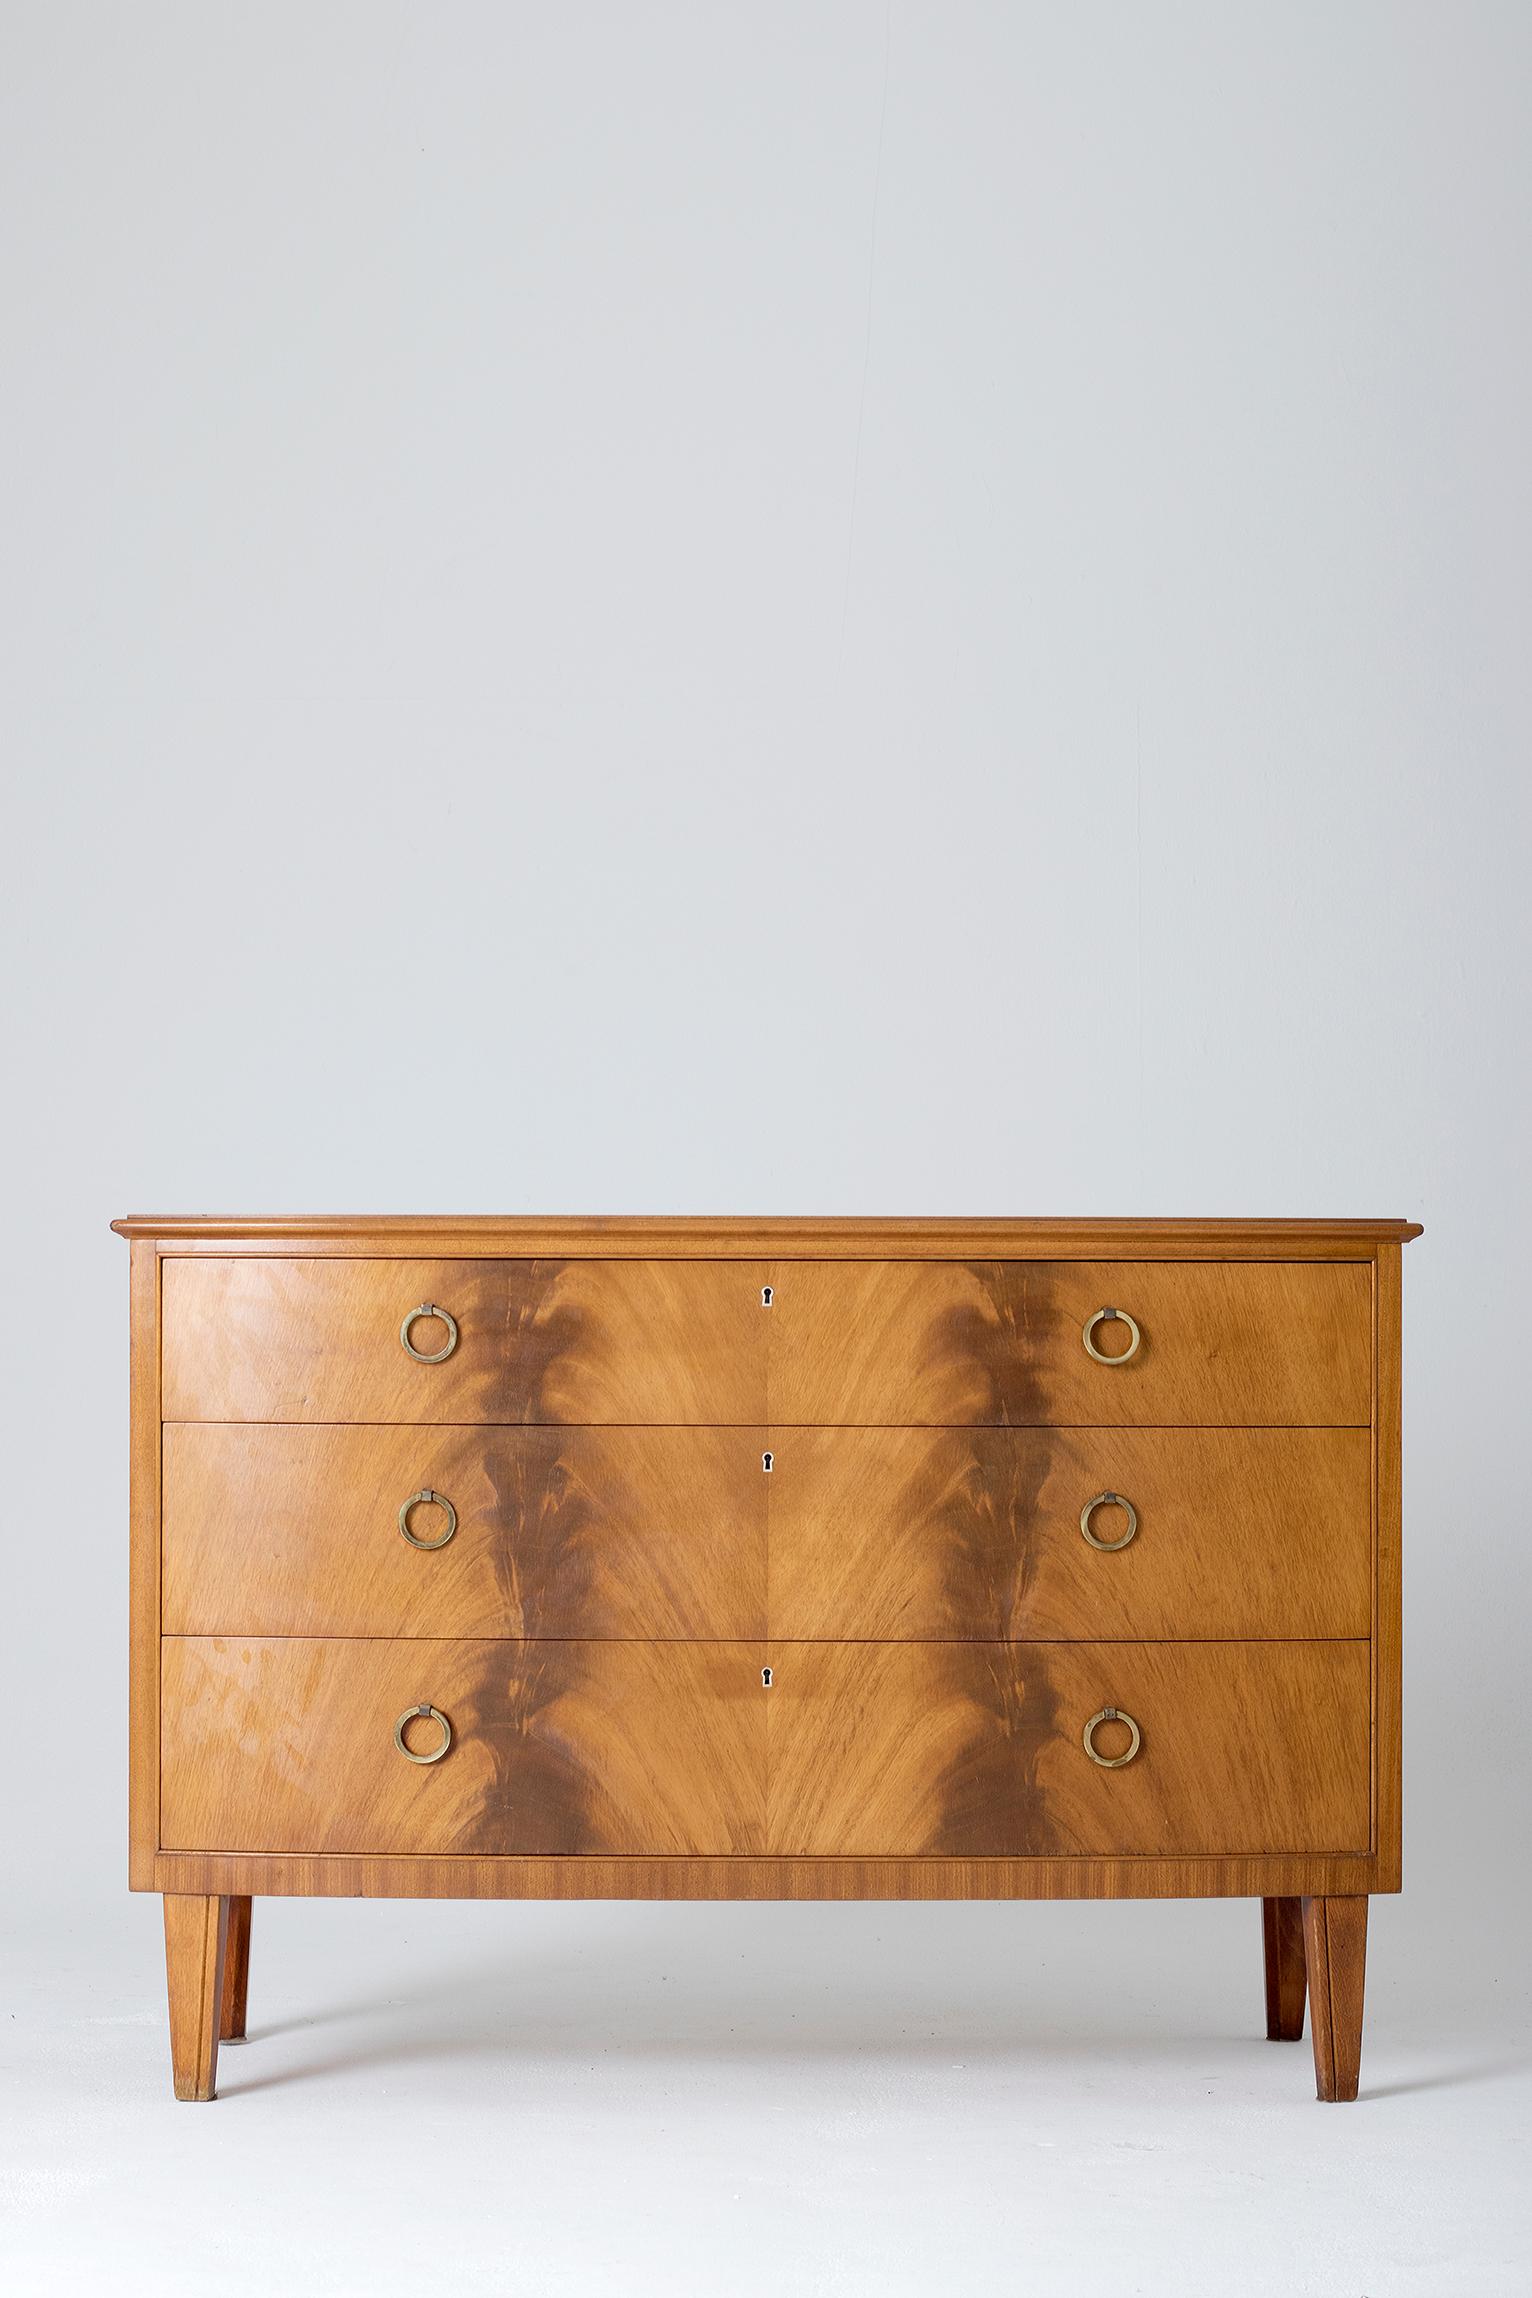 A flamed mahogany chest of drawers, with brass handles, by J. O. Carlssons.
Bearing the maker's label.
Sweden, late 1950s.